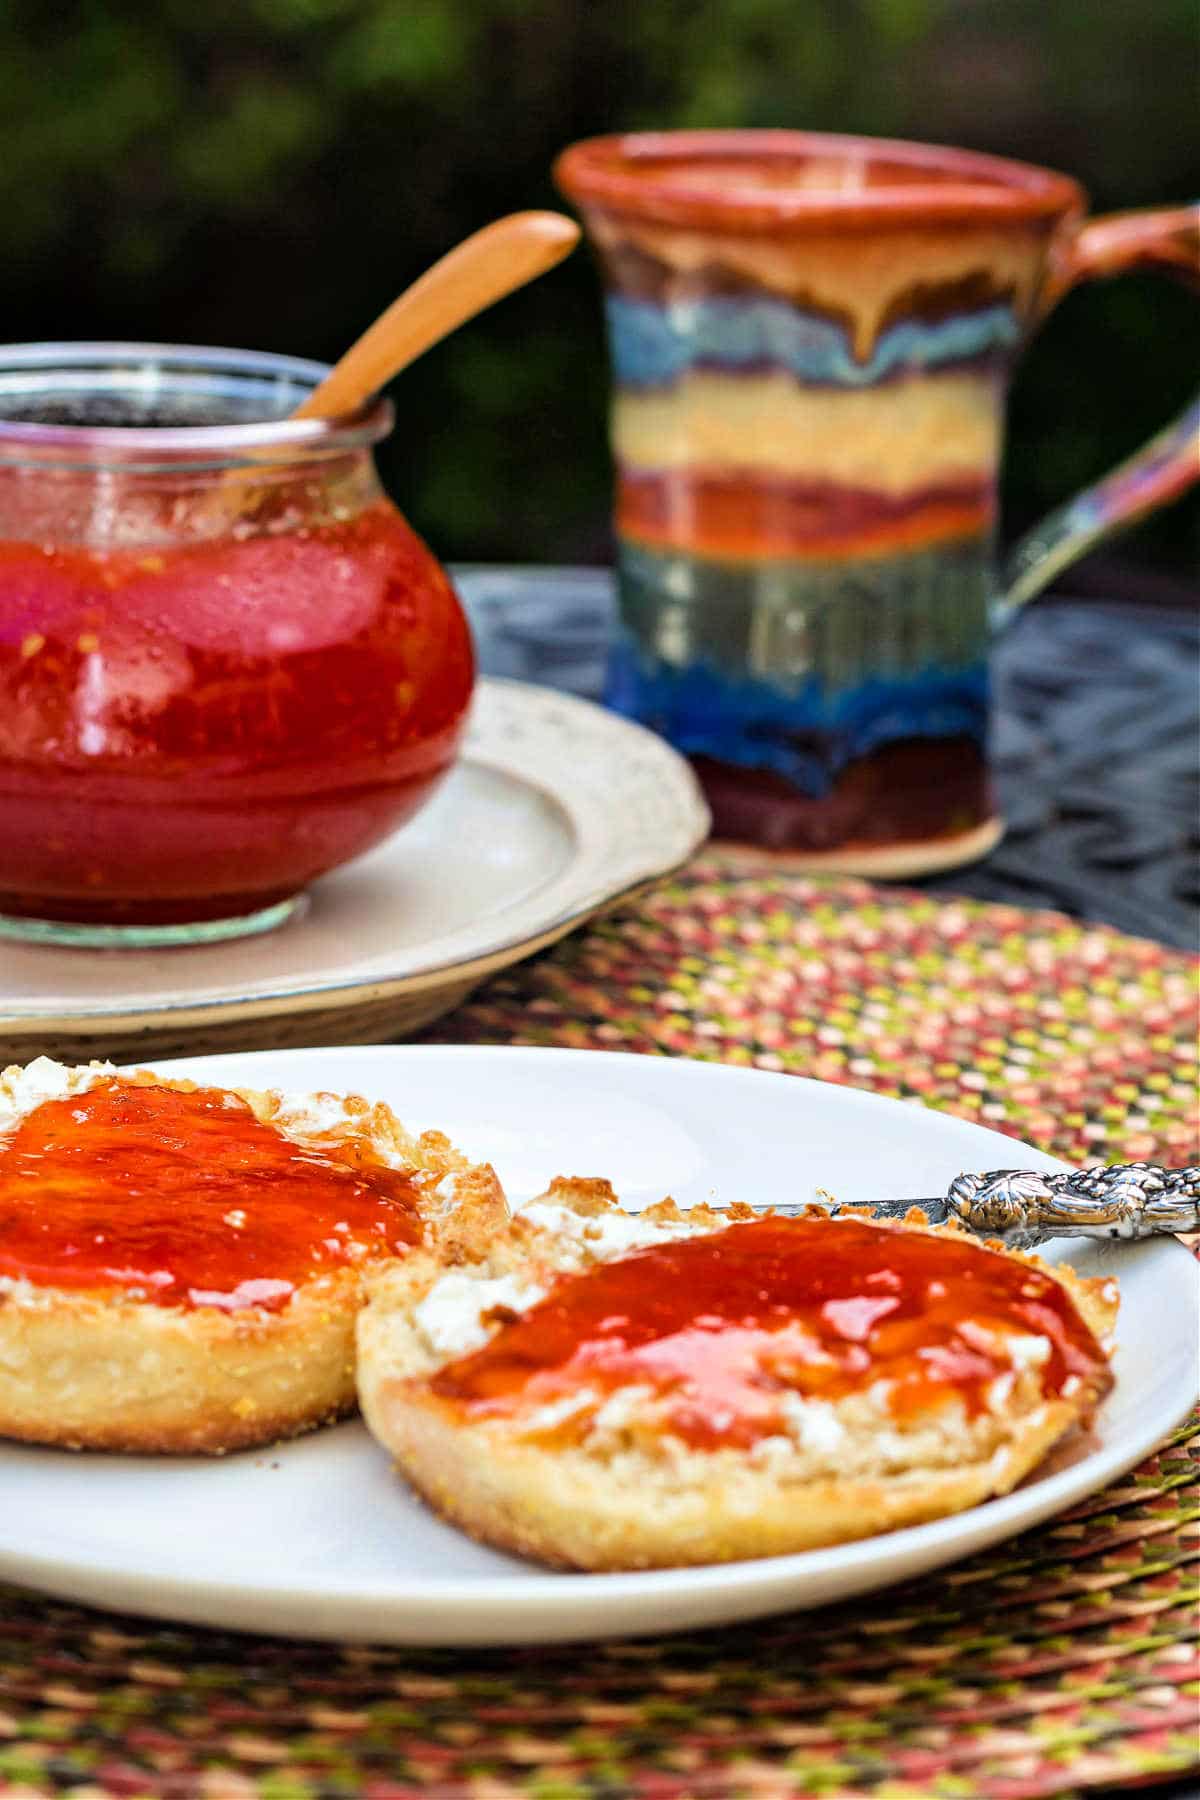 A white plate with two pieces of English muffin on it spread with jam. The jar of jam is in the background along with a multi-colored mug.